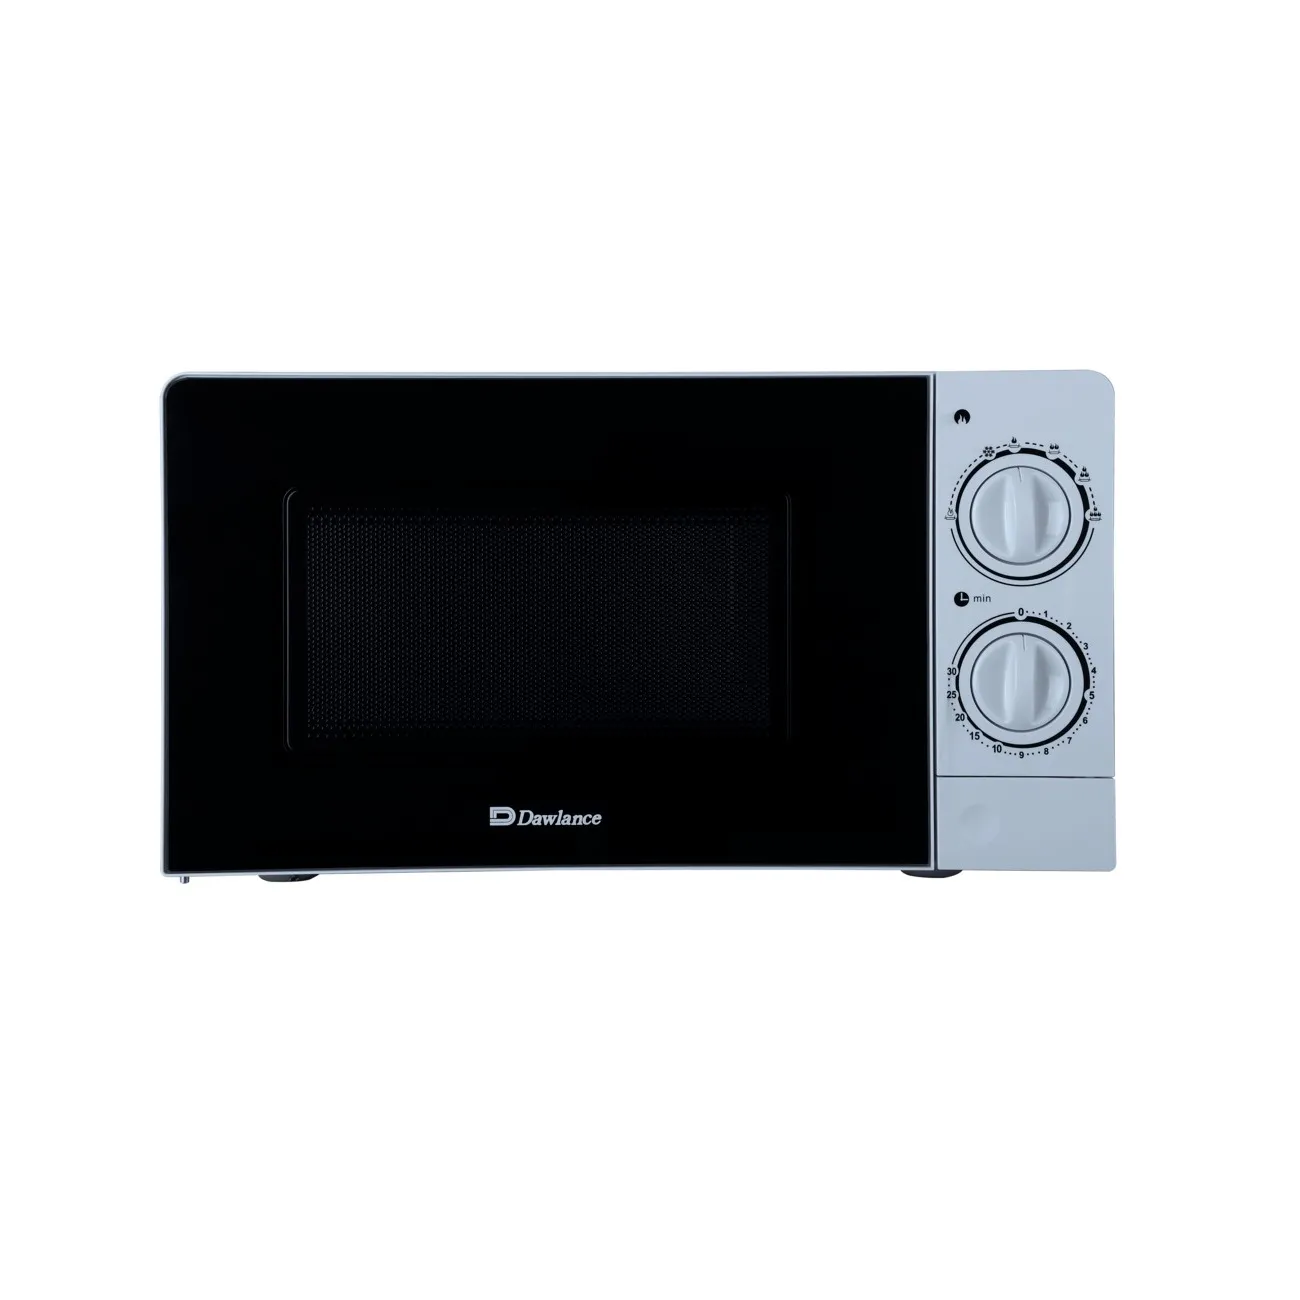 DW 220 S Heating Microwave Oven